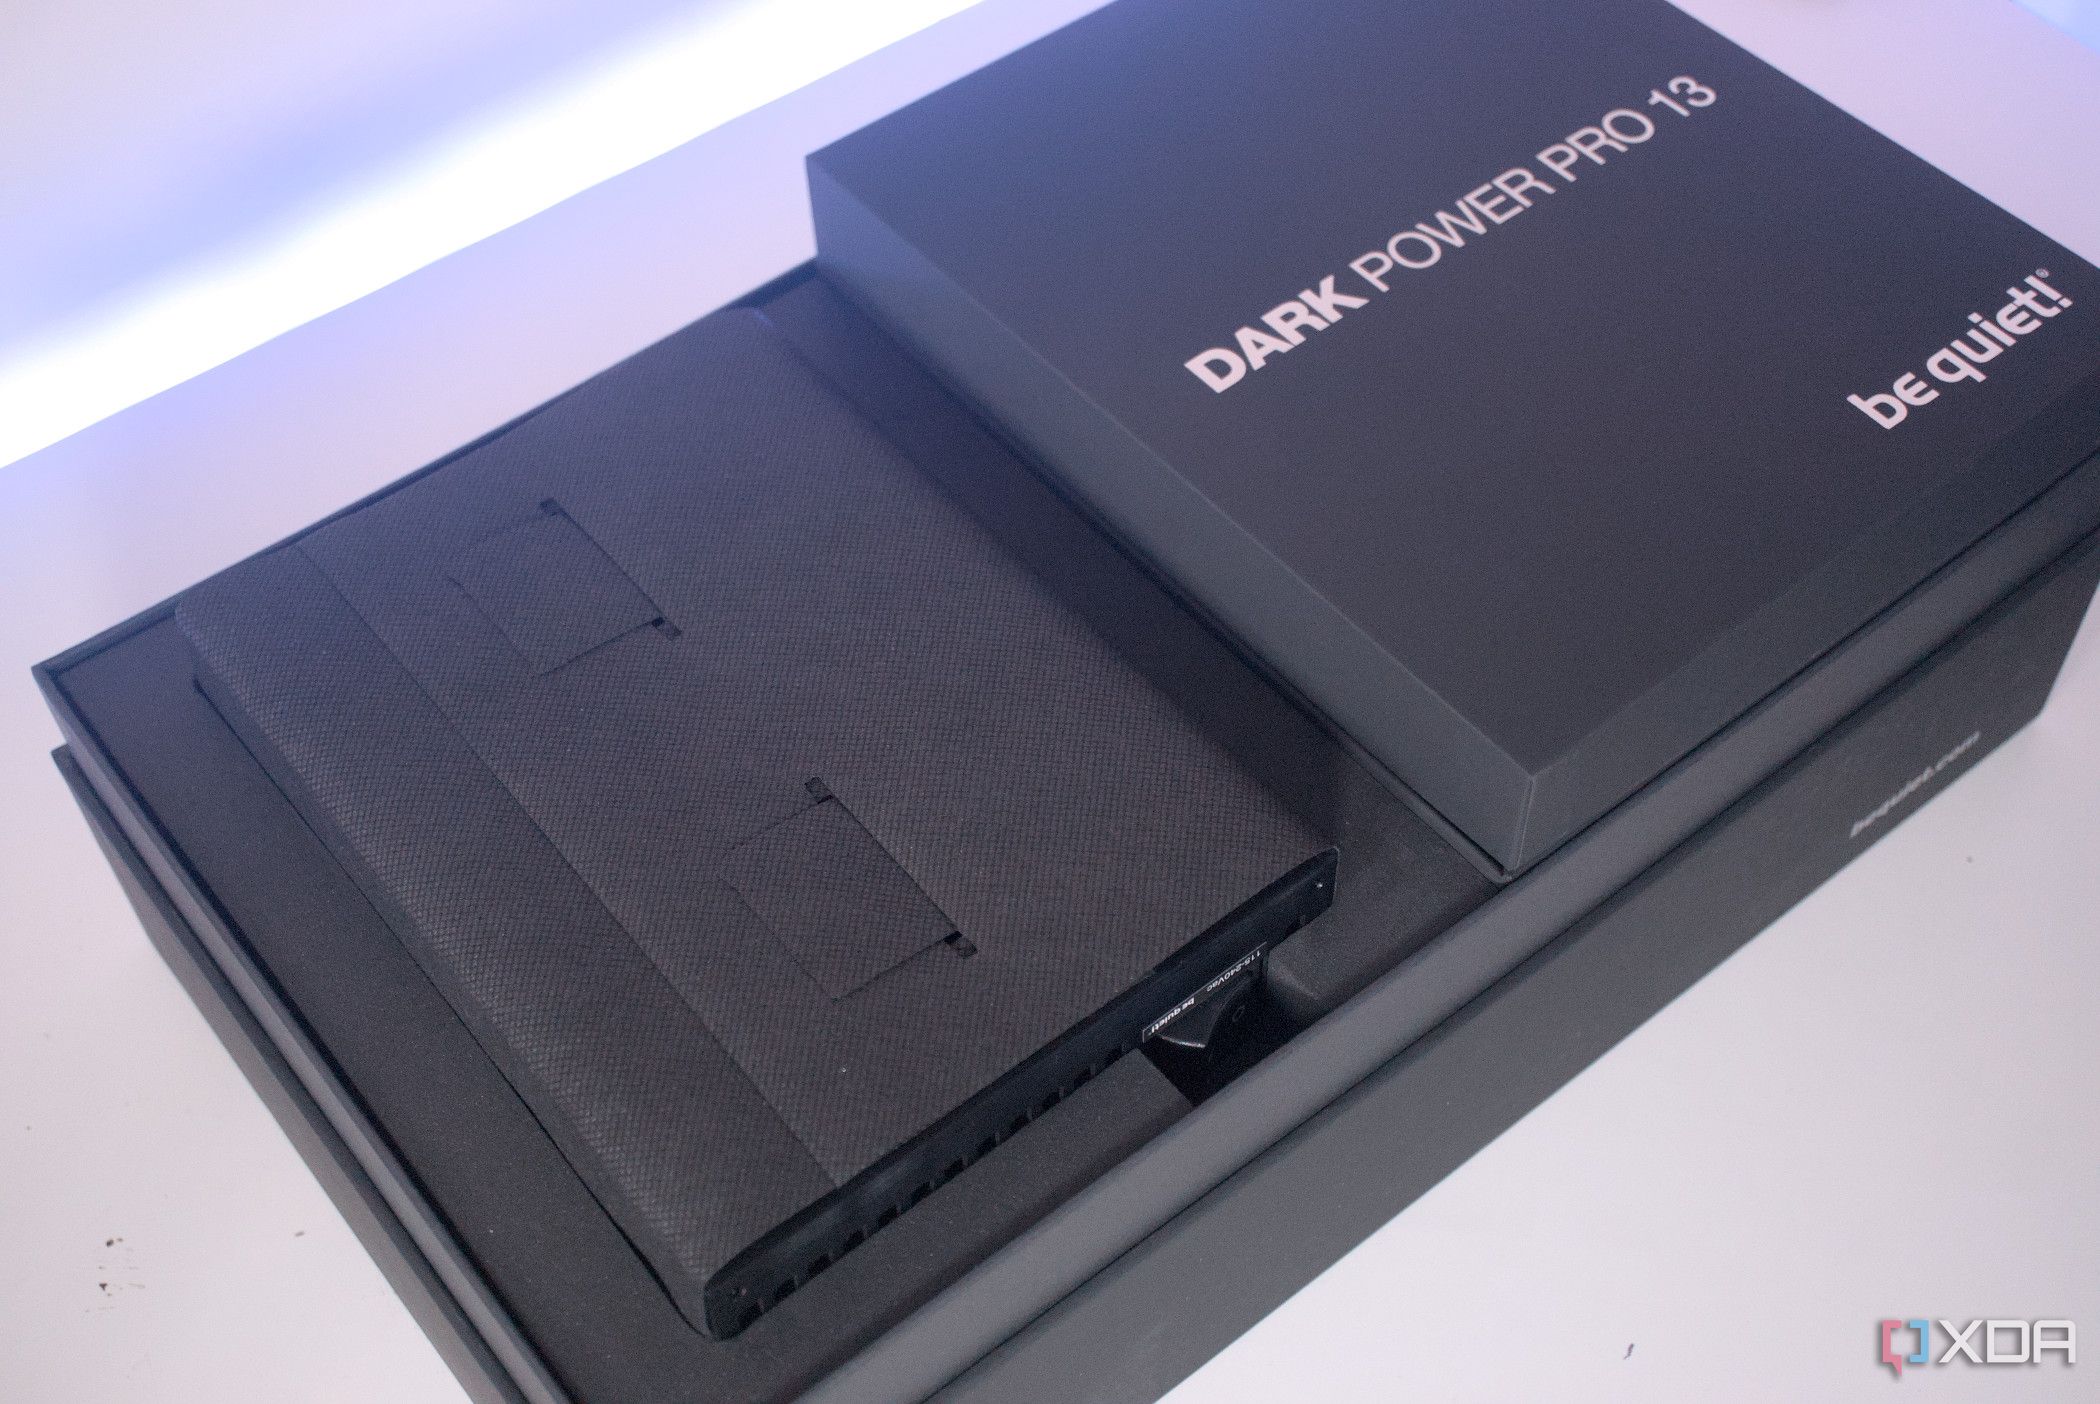 be quiet! Dark Power Pro 13 1300W review: The best enthusiast power supply